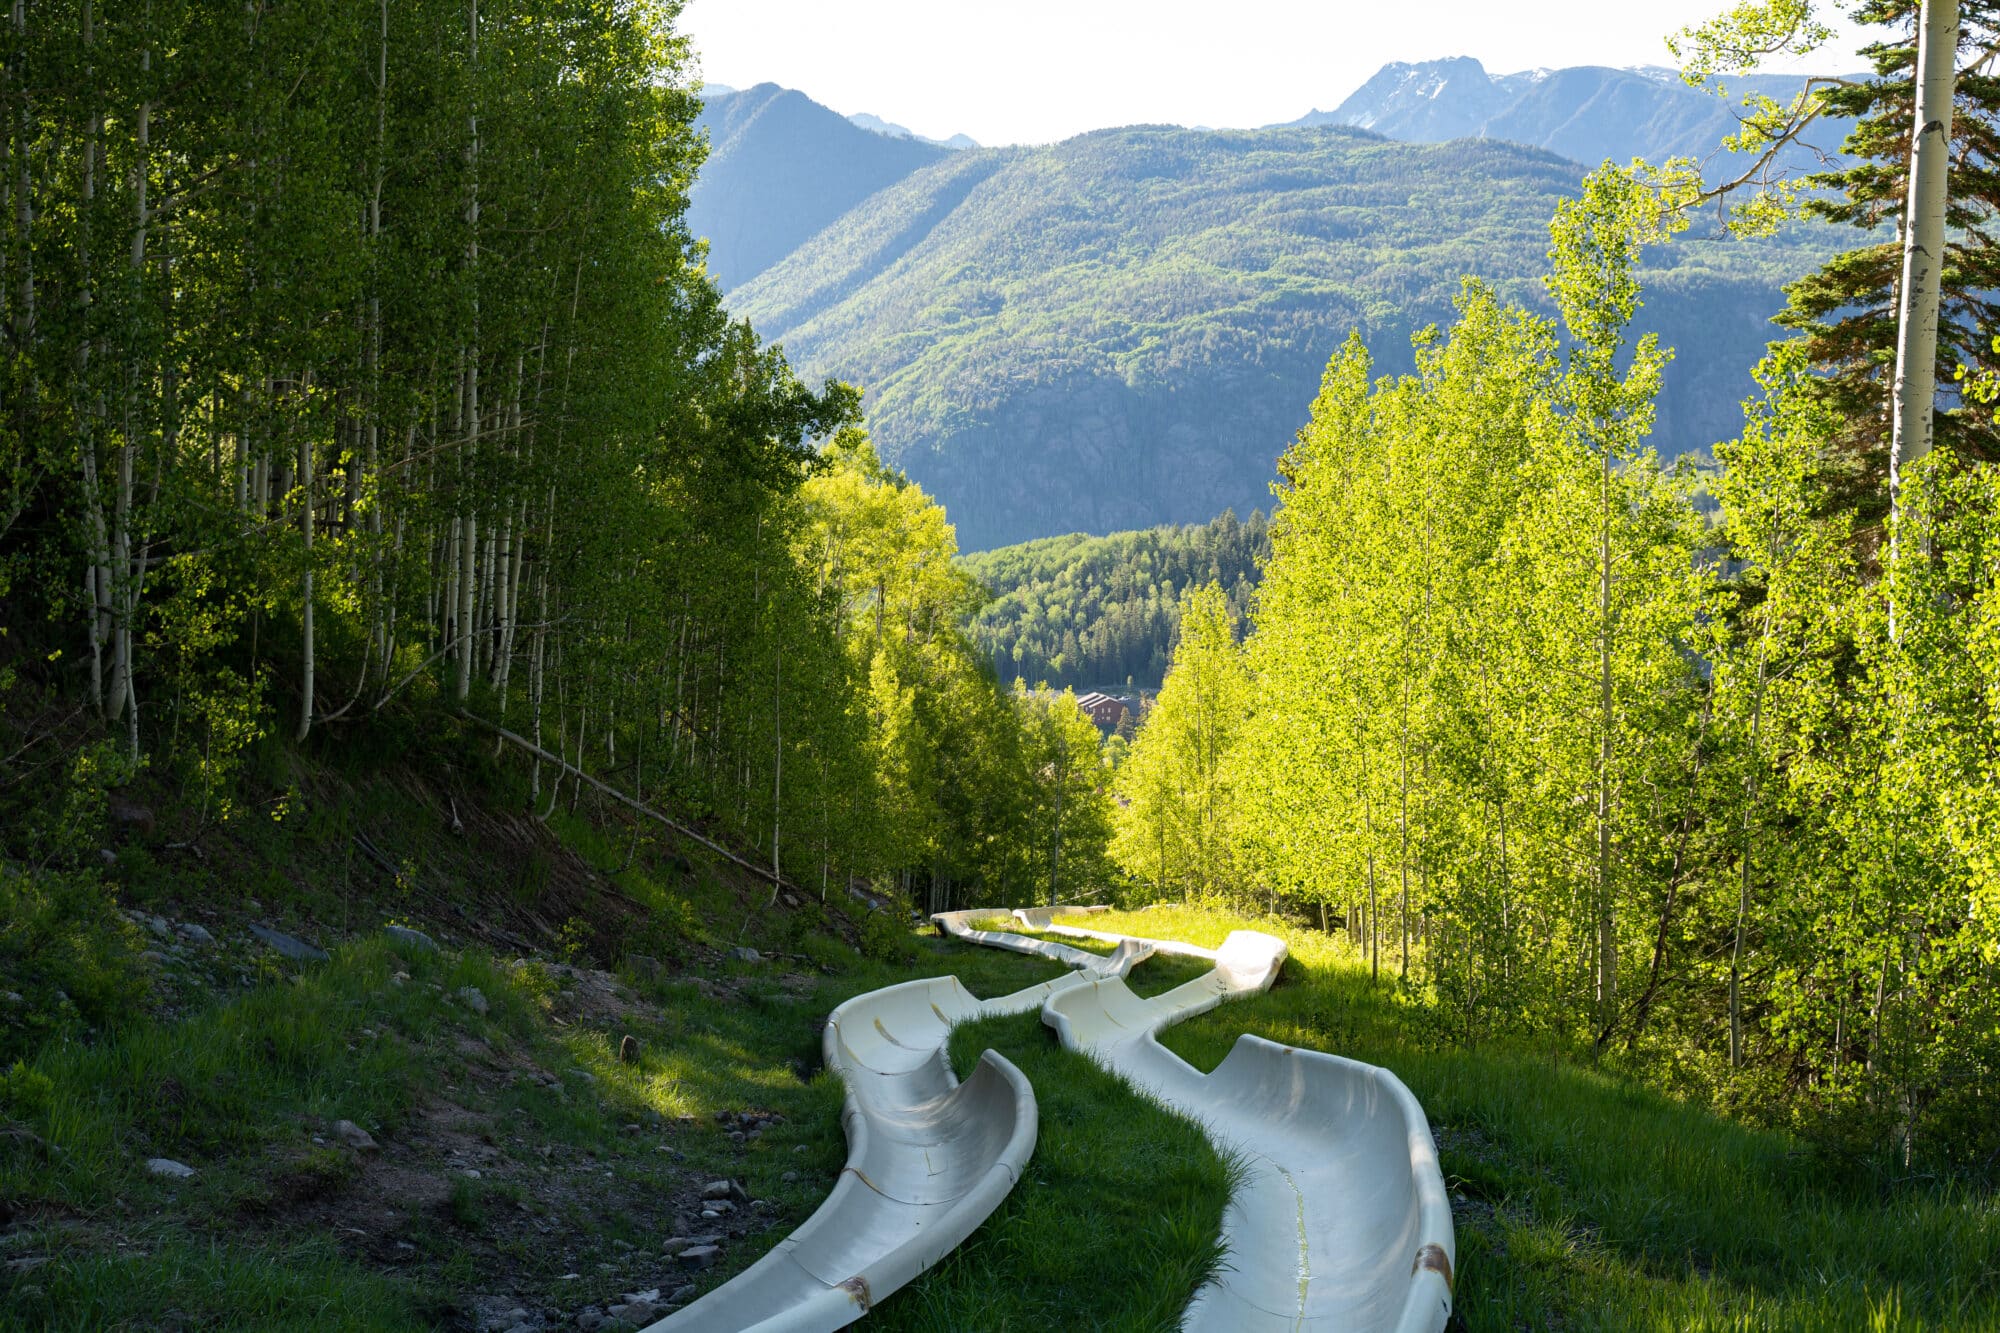 A view of the alpine slide snaking its way down the mountain as the sunrise lights up the aspen trees